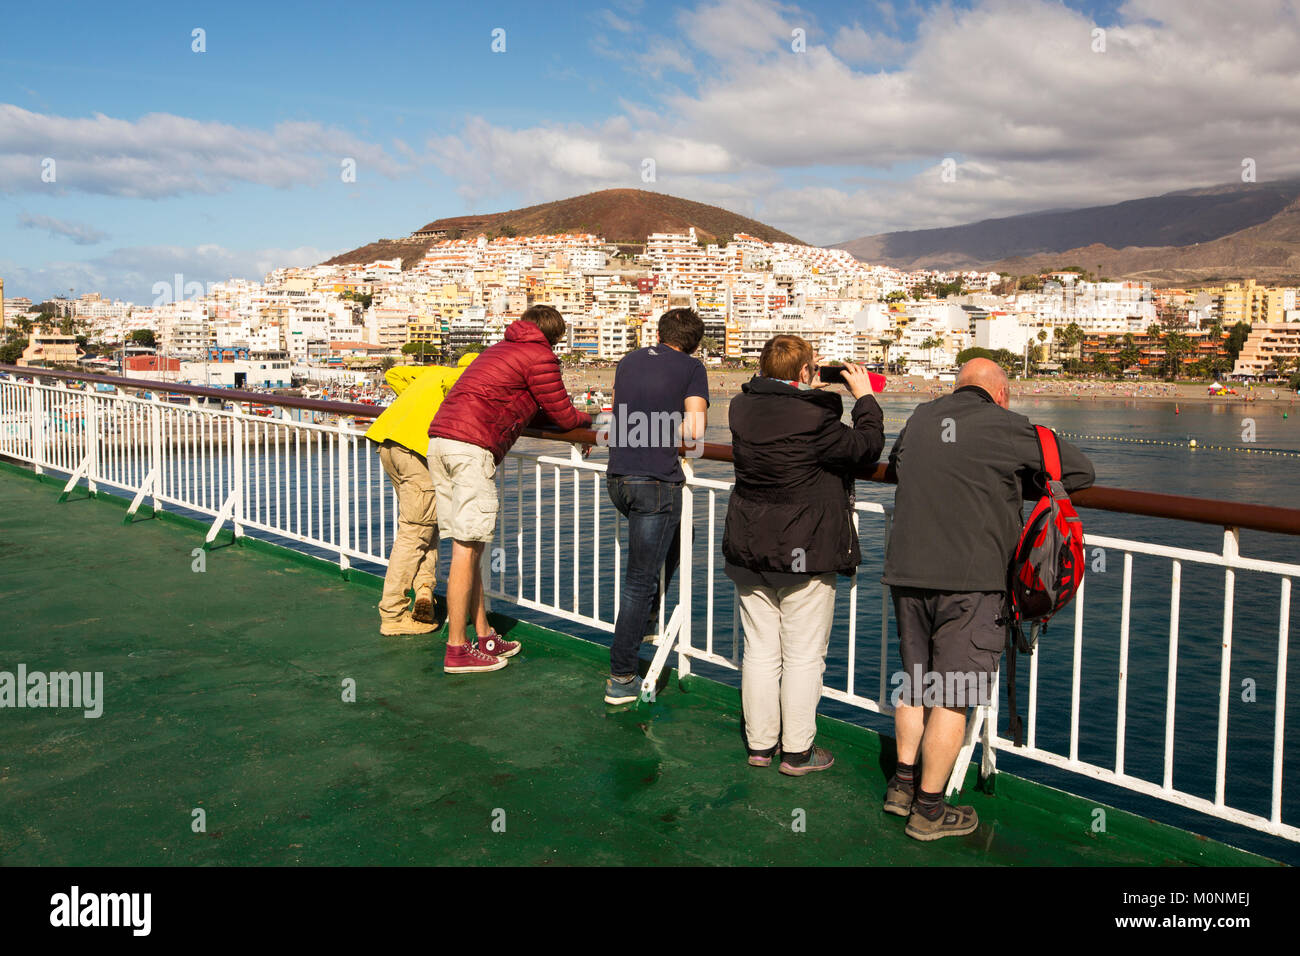 Passengers on a ferry coming into Los Christianos on Tenerife, Canary Islands. Stock Photo